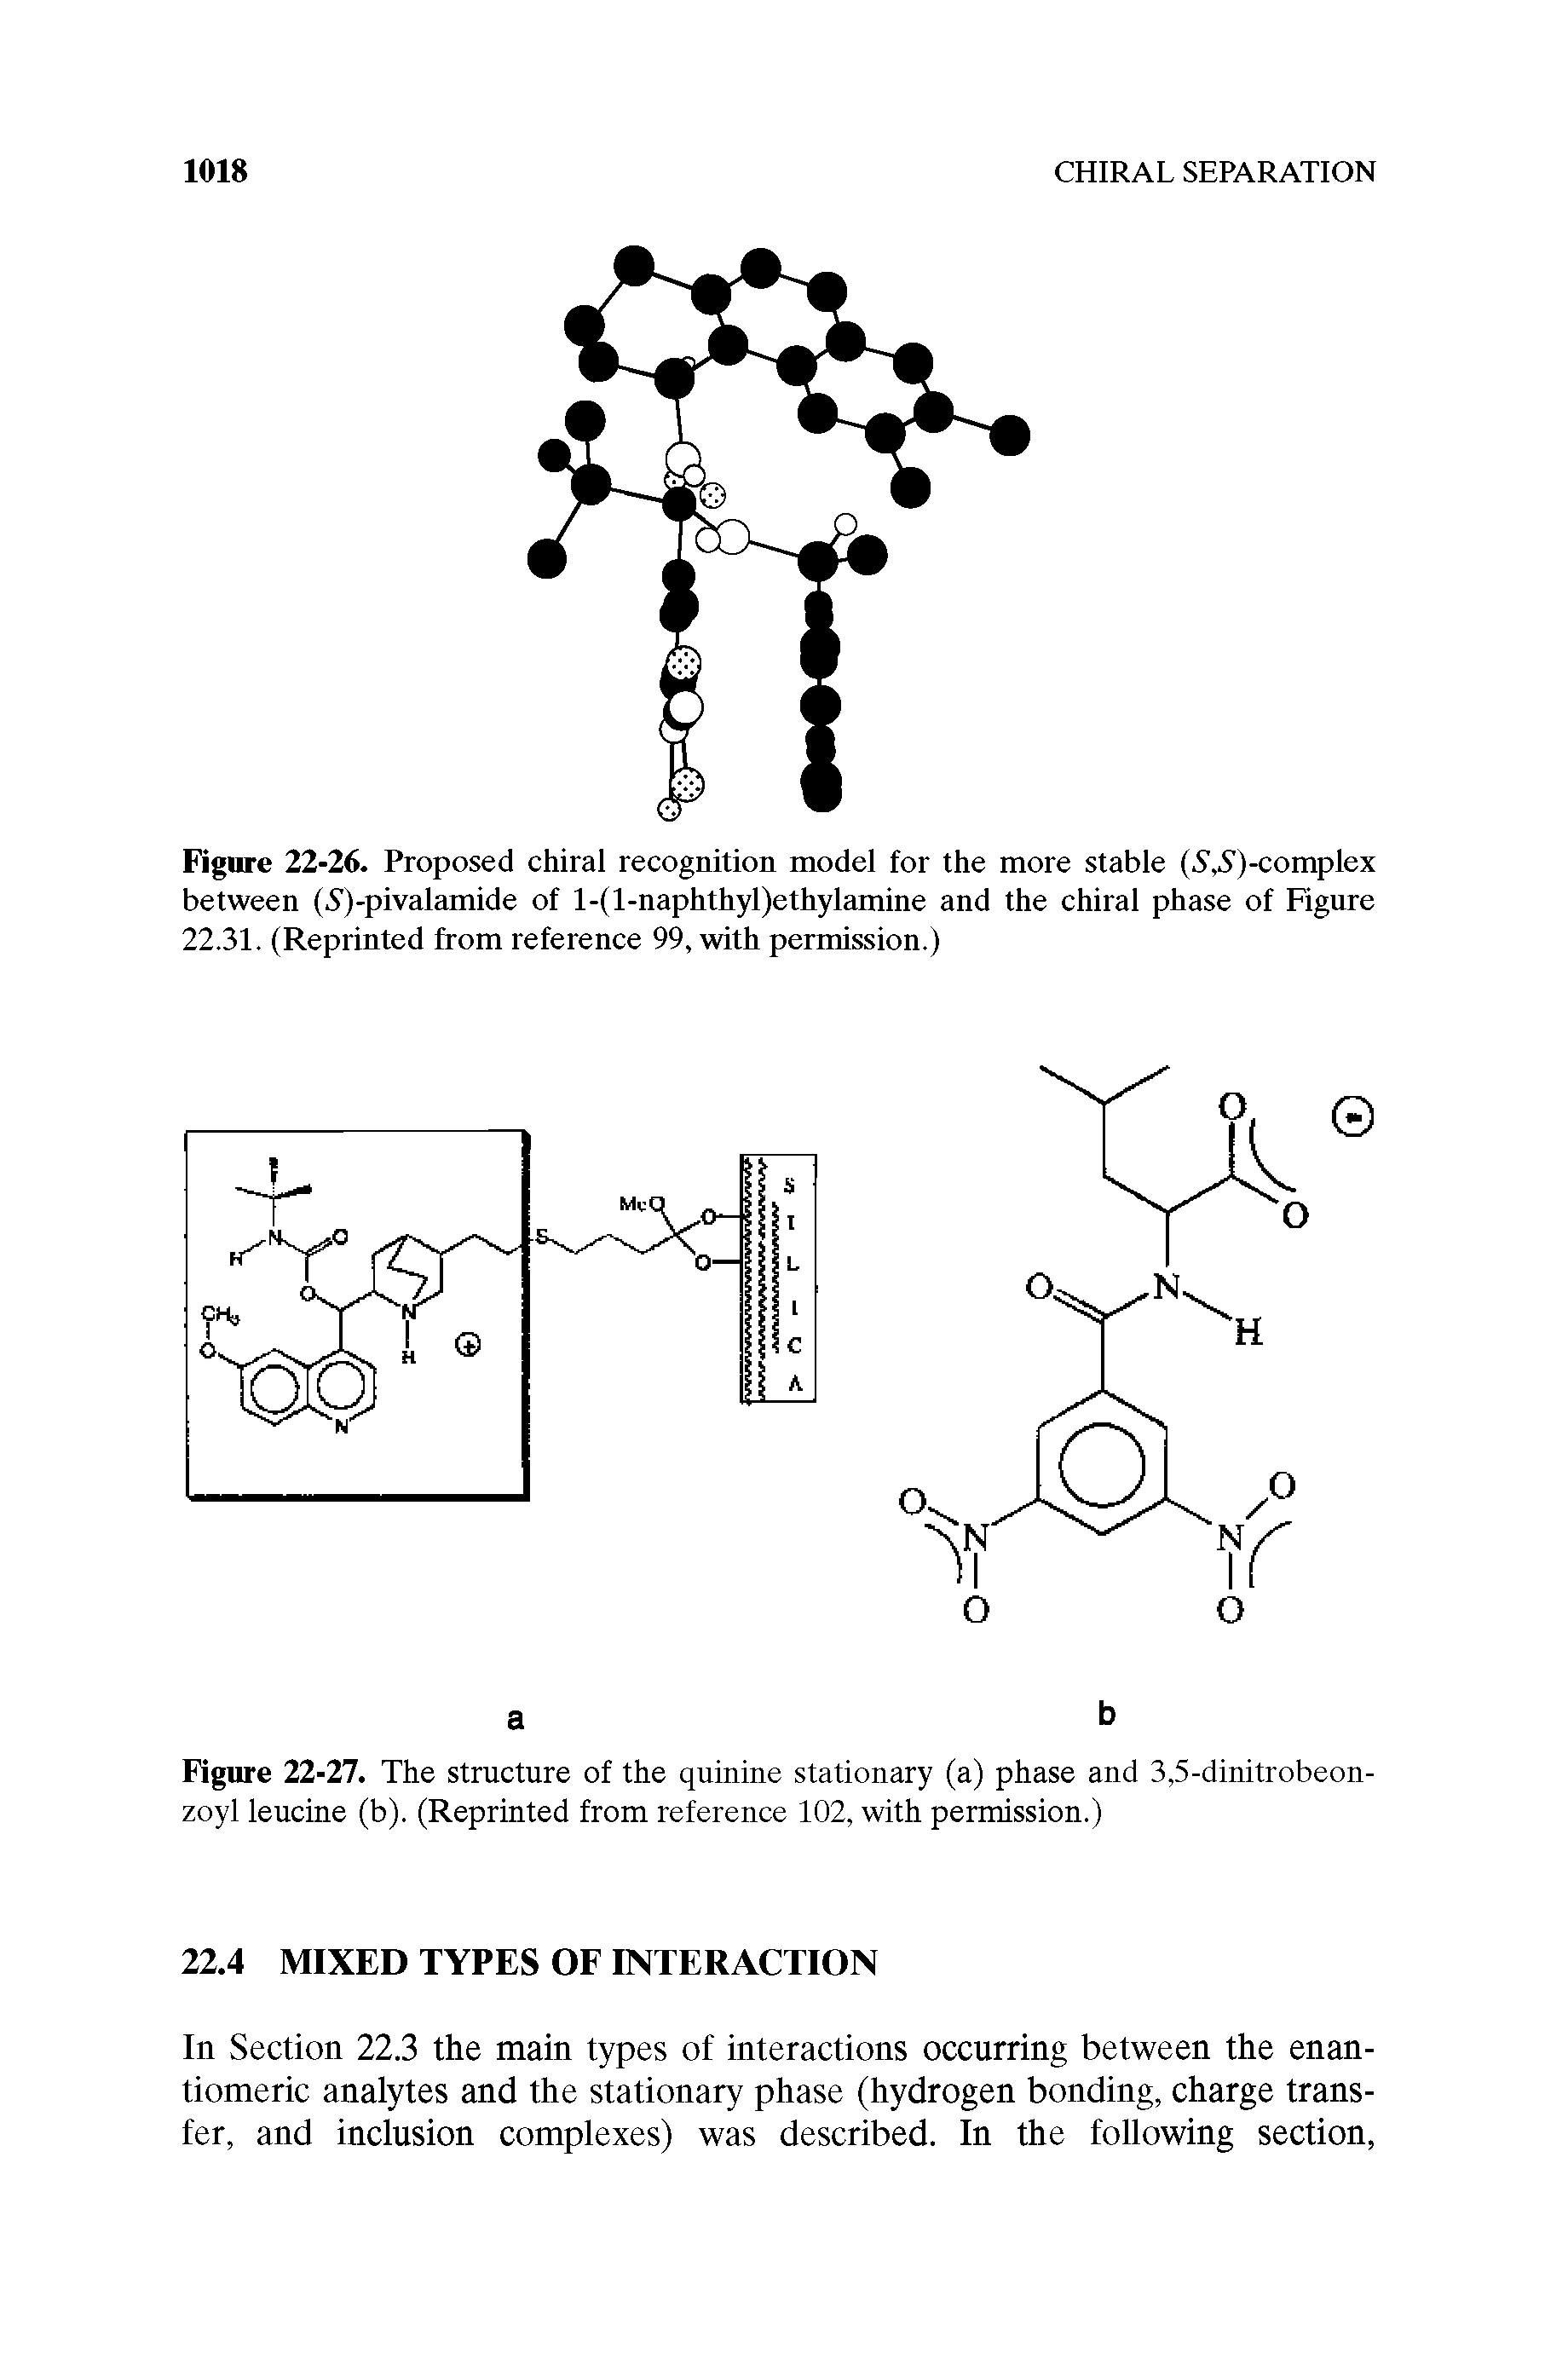 Figure 22-26. Proposed chiral recognition model for the more stable (5, 5 )-complex between (5 )-pivalamide of l-(l-naphthyl)ethylamine and the chiral phase of Figure 22.31. (Reprinted from reference 99, with permission.)...